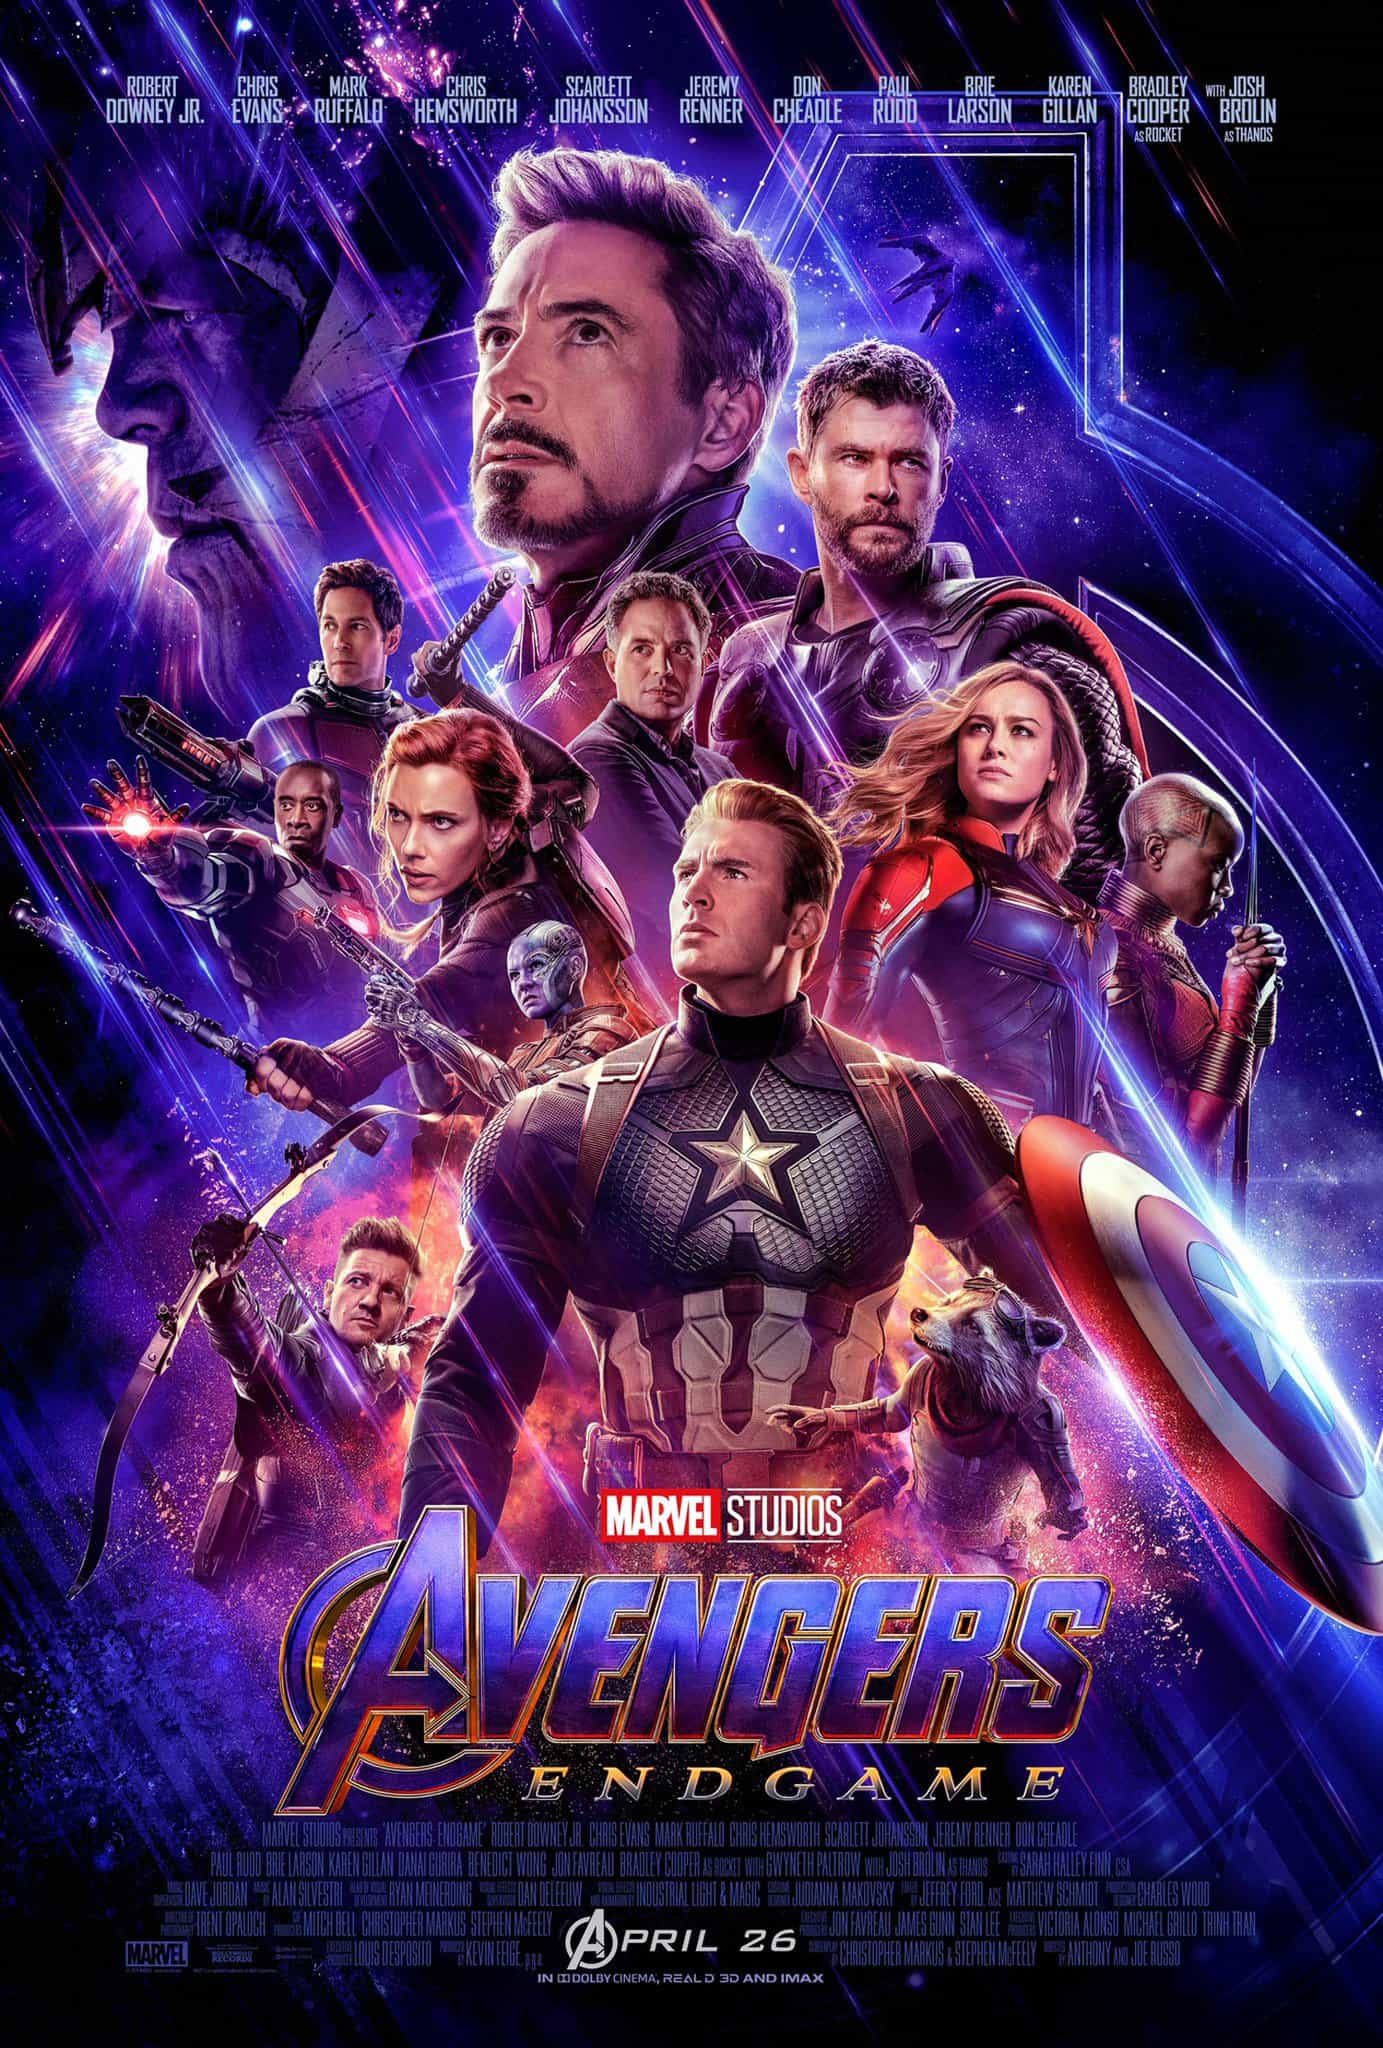 TV spot for Avengers Endgame, 30 seconds of new footage